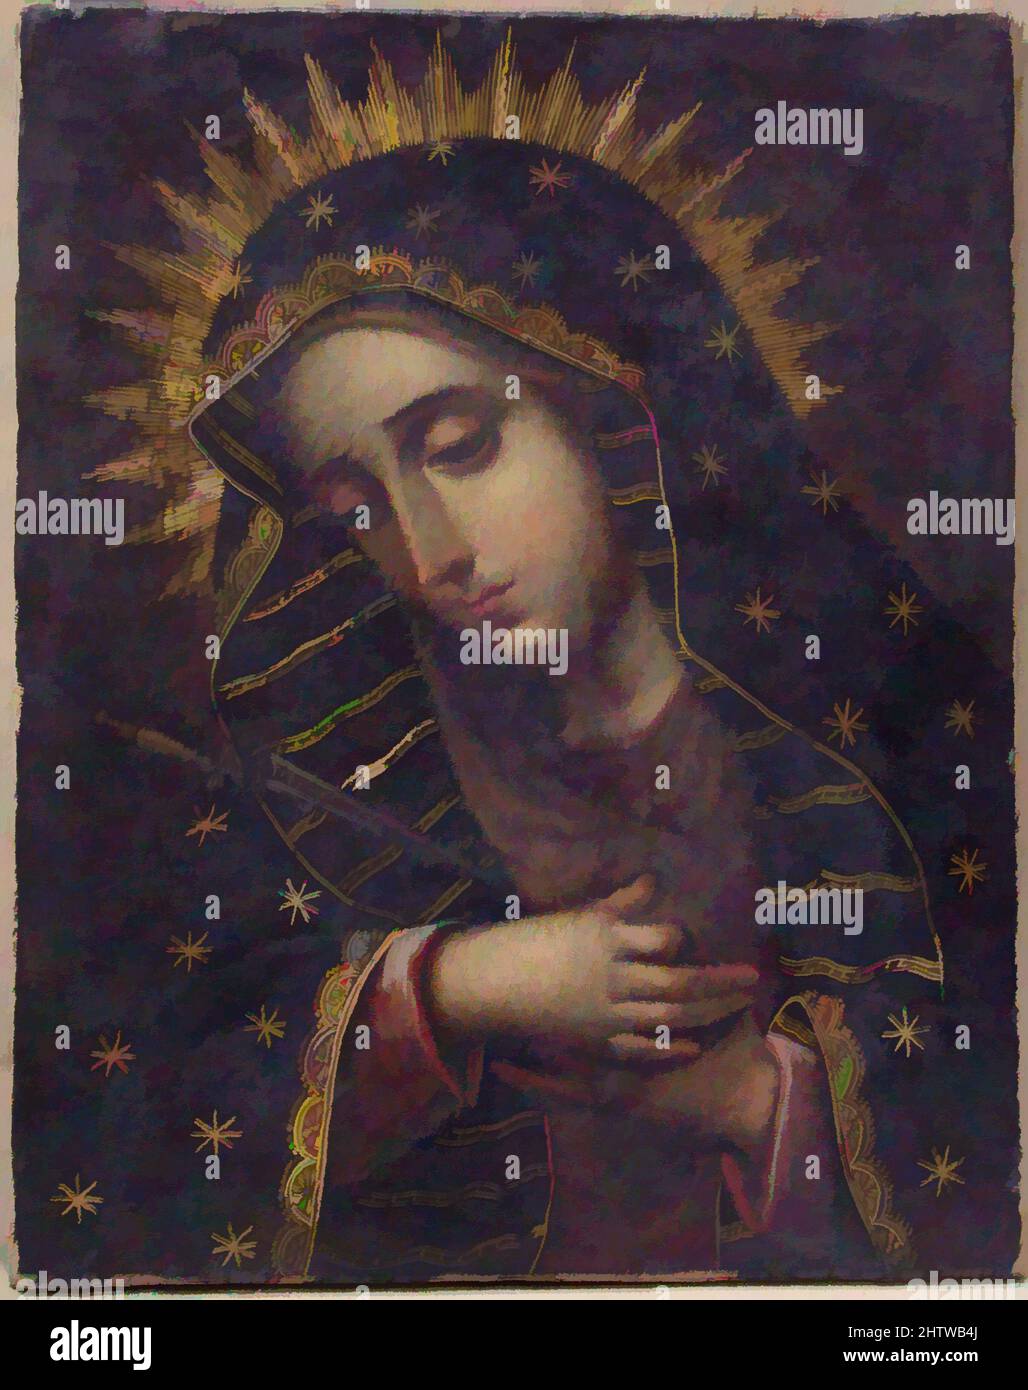 Art inspired by The Sorrowing Virgin, 18th century, Possibly made in Mexico, Spanish Colonial, Oil on canvas, Overall: 10 3/4 x 8 1/2 in. (27.3 x 21.6 cm), Paintings, Classic works modernized by Artotop with a splash of modernity. Shapes, color and value, eye-catching visual impact on art. Emotions through freedom of artworks in a contemporary way. A timeless message pursuing a wildly creative new direction. Artists turning to the digital medium and creating the Artotop NFT Stock Photo